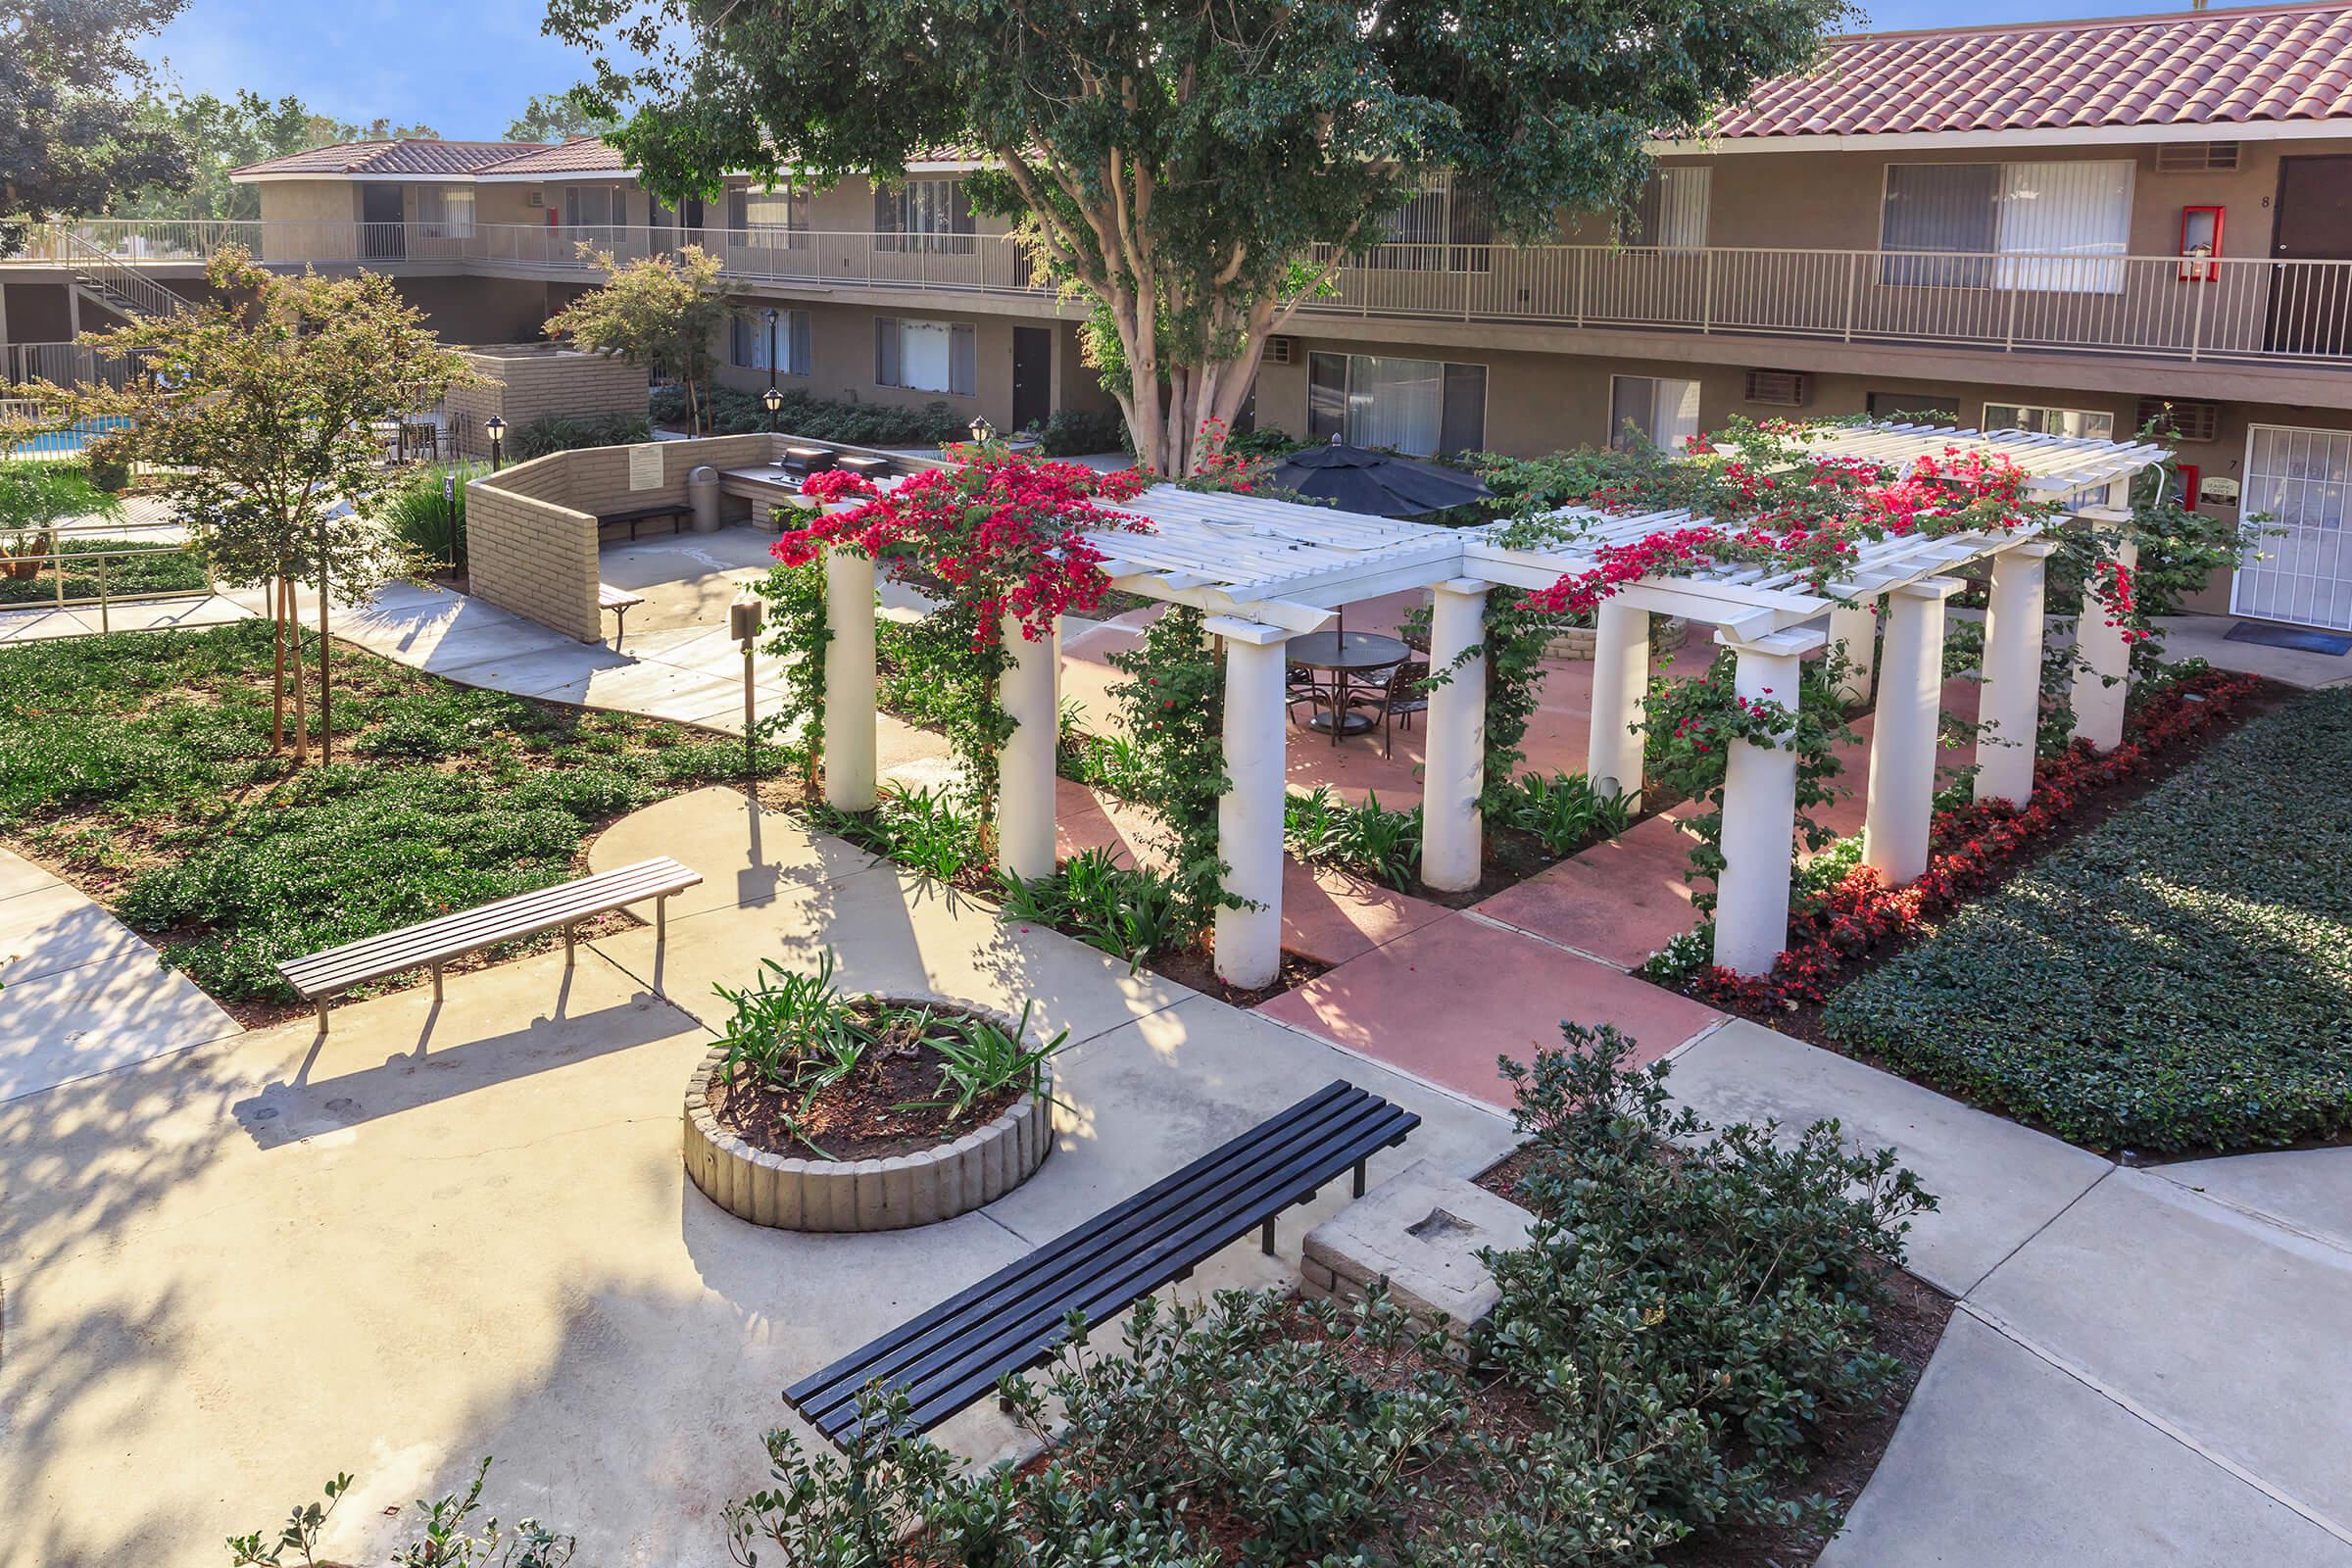 Camino Pueblo and El Rancho Apartment Homes courtyard with white arbors and flowers